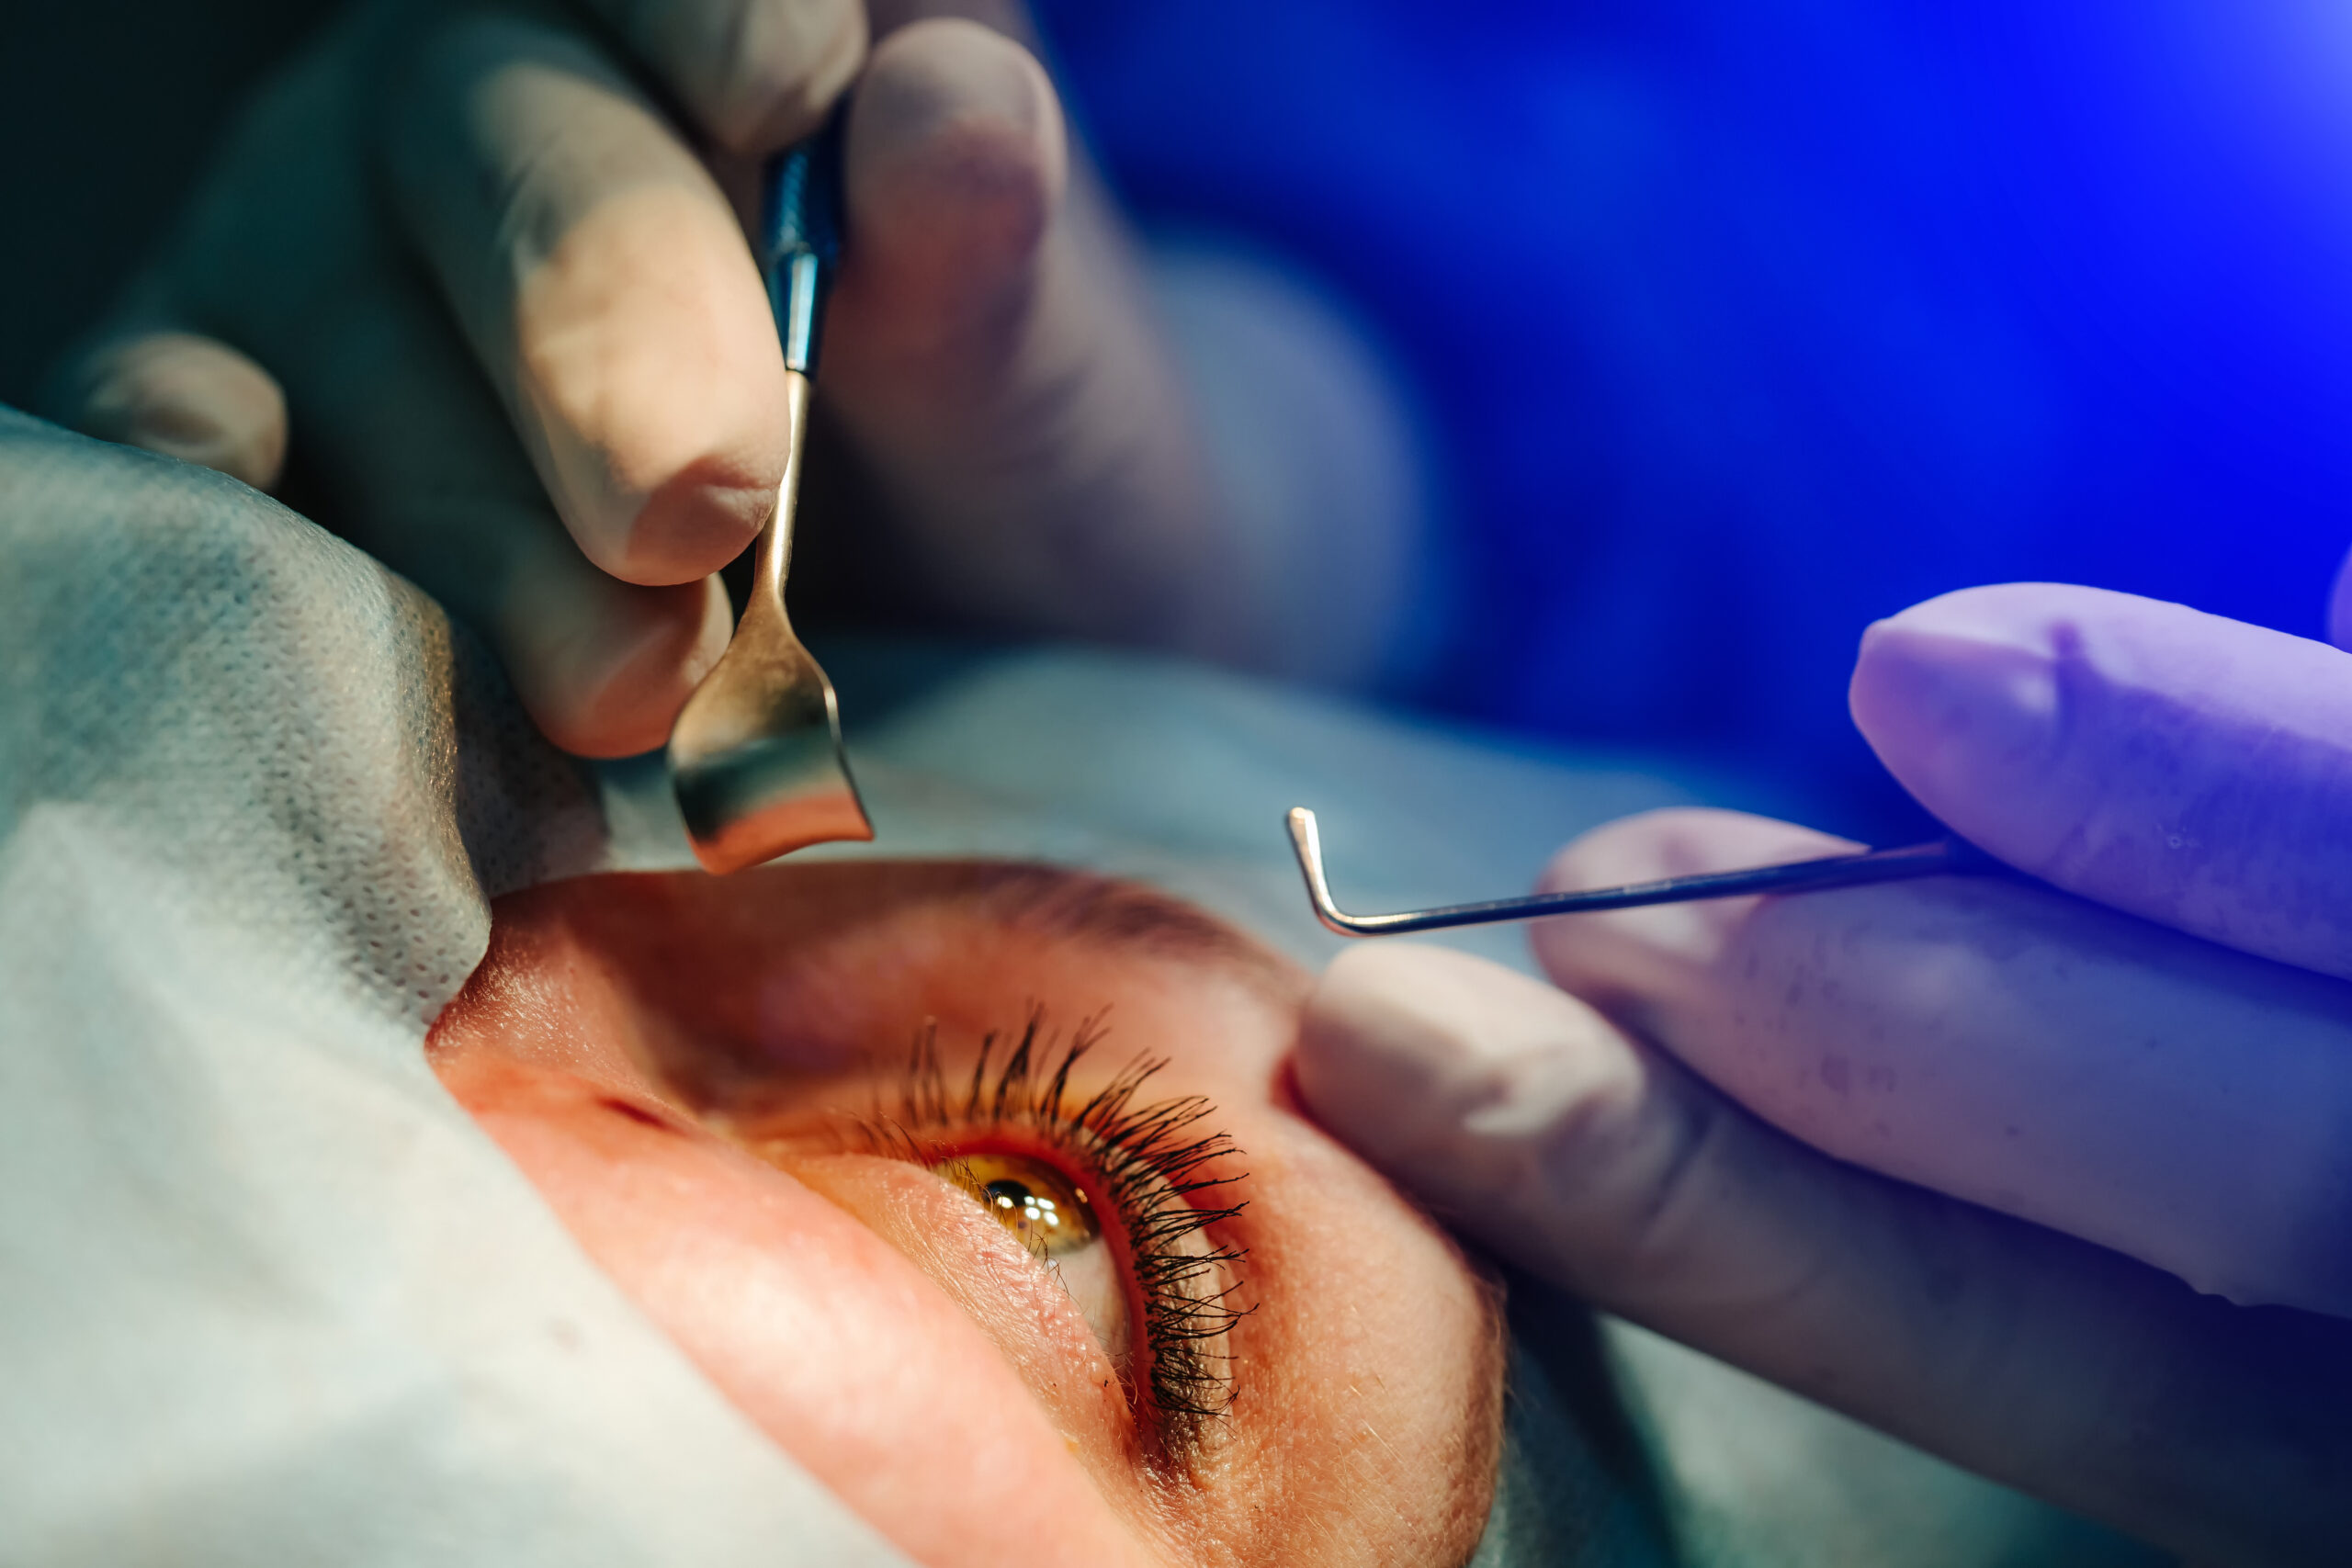 The operation on the eye. Cataract surgery. Vision correction.